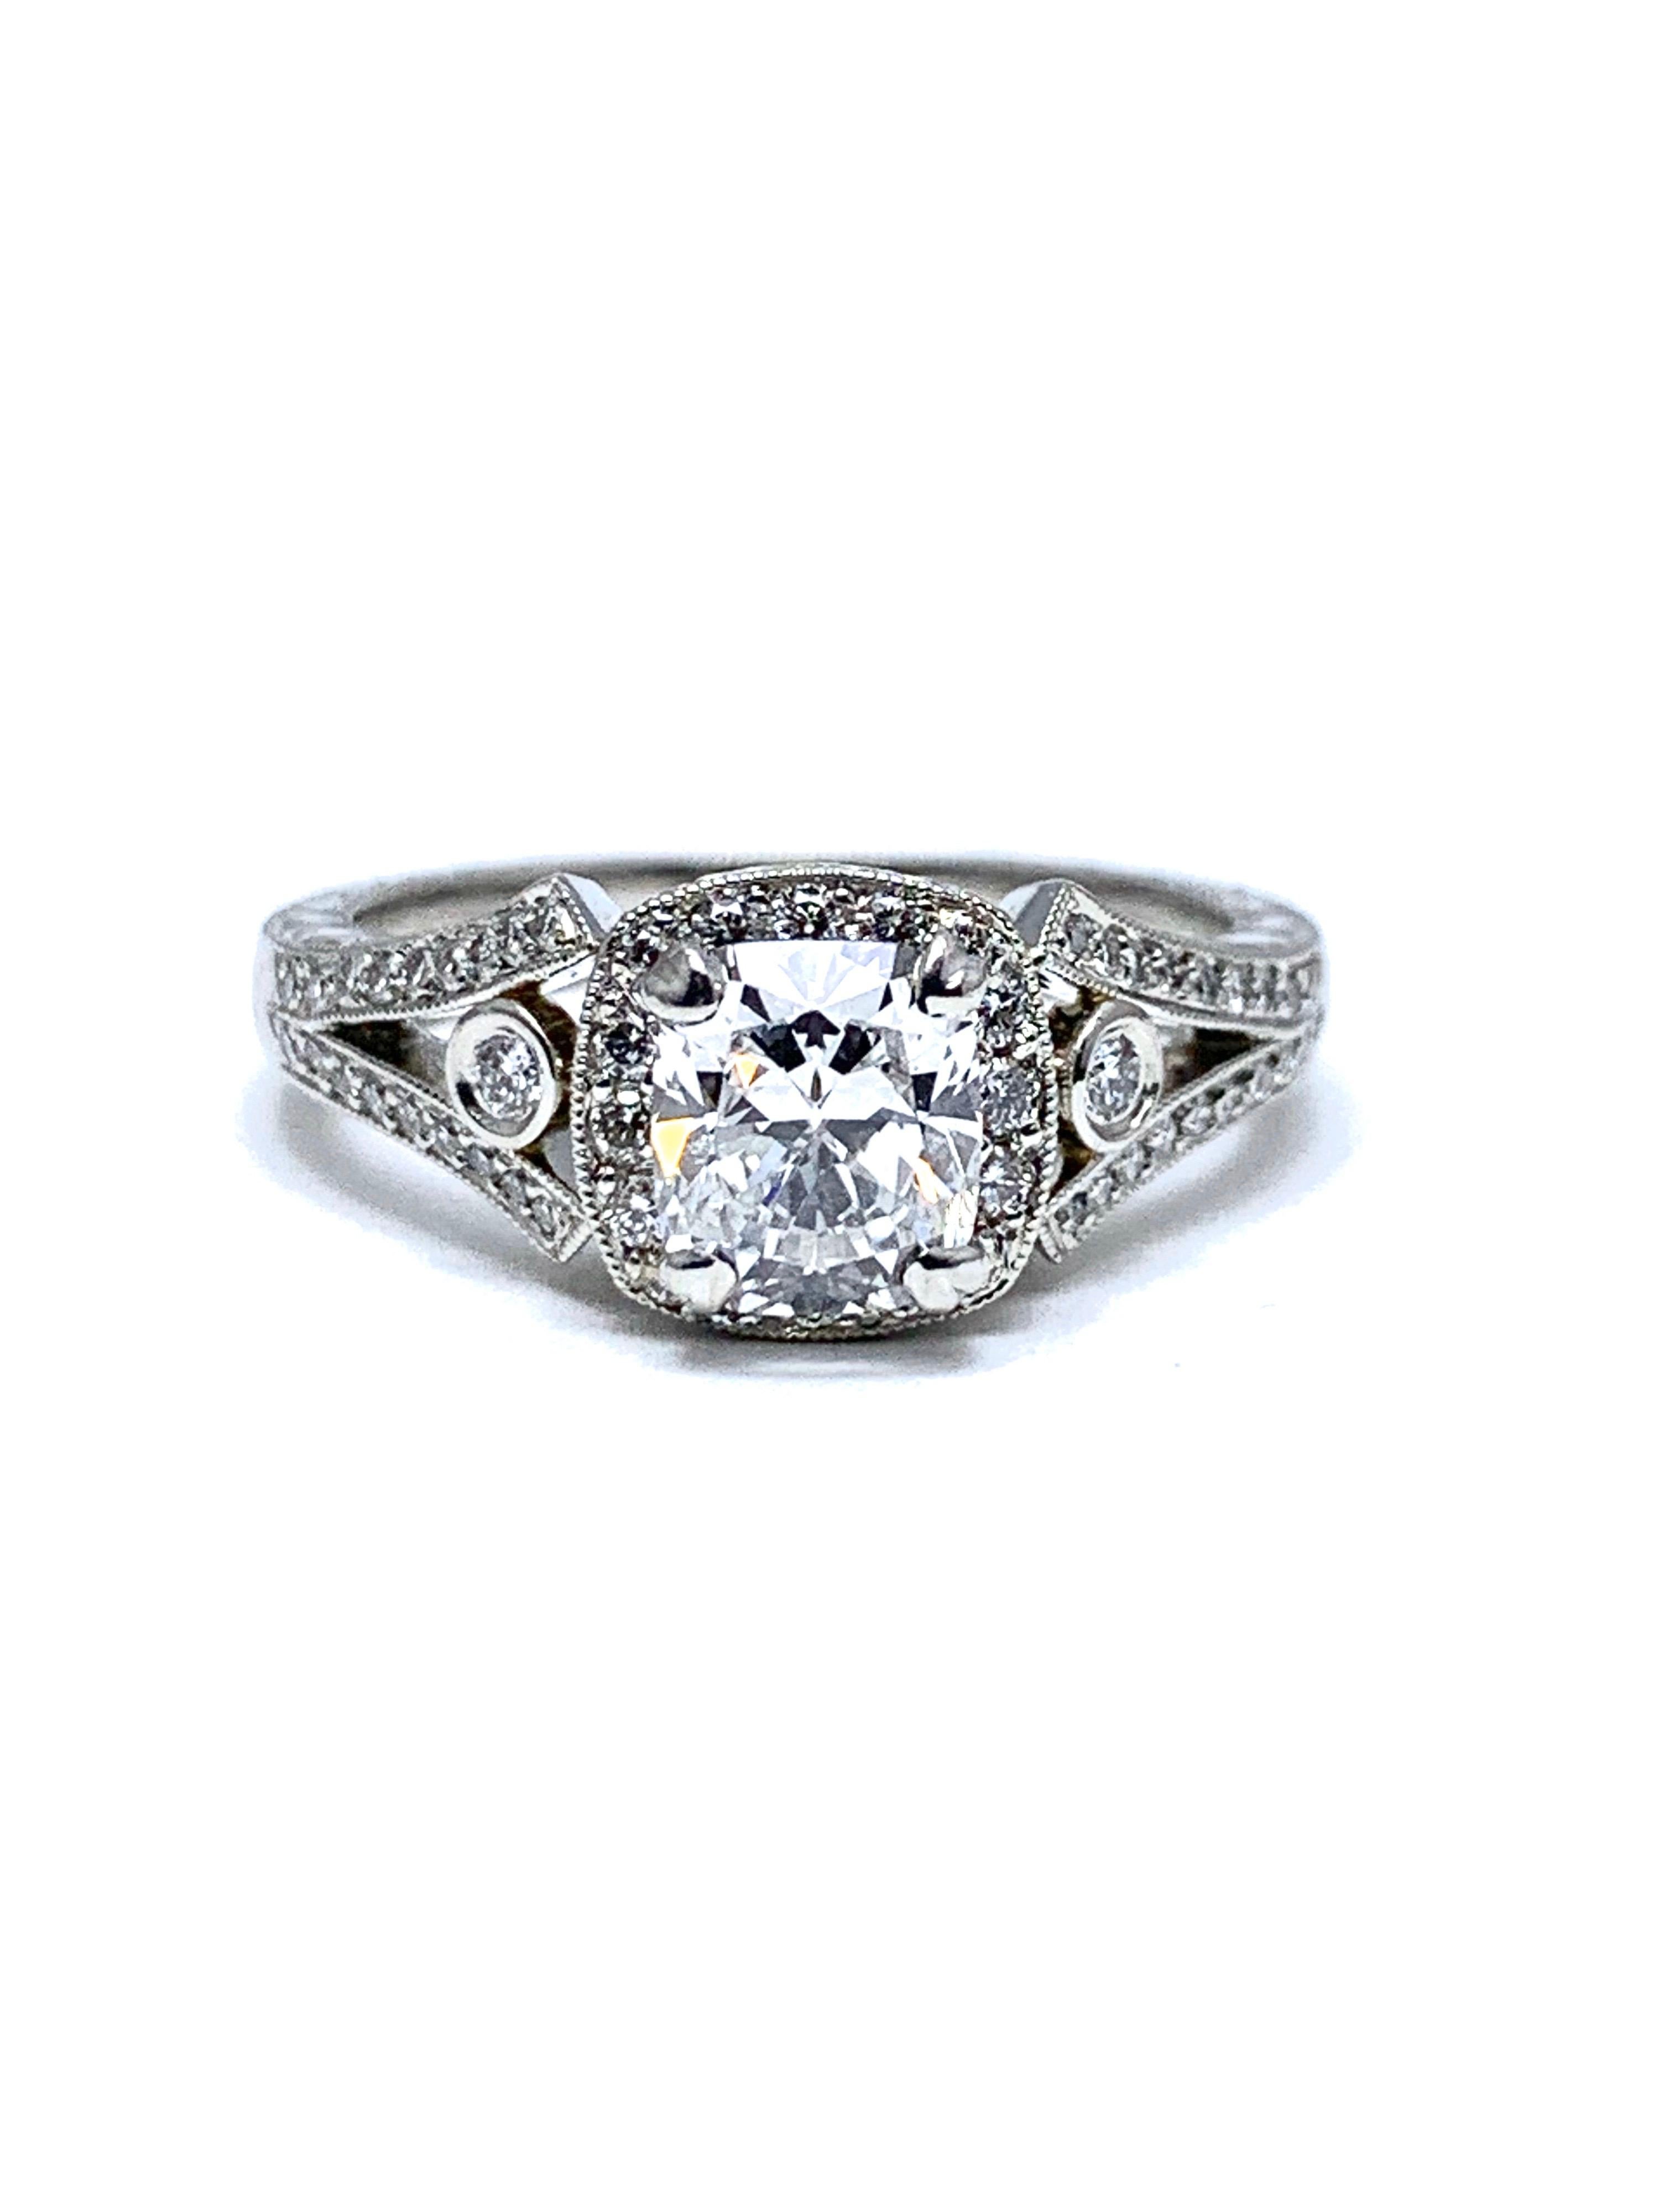 Art Deco 1.03 Carat D/SI1 Diamond with Diamond Halo and Hand Engraved Platinum Ring For Sale